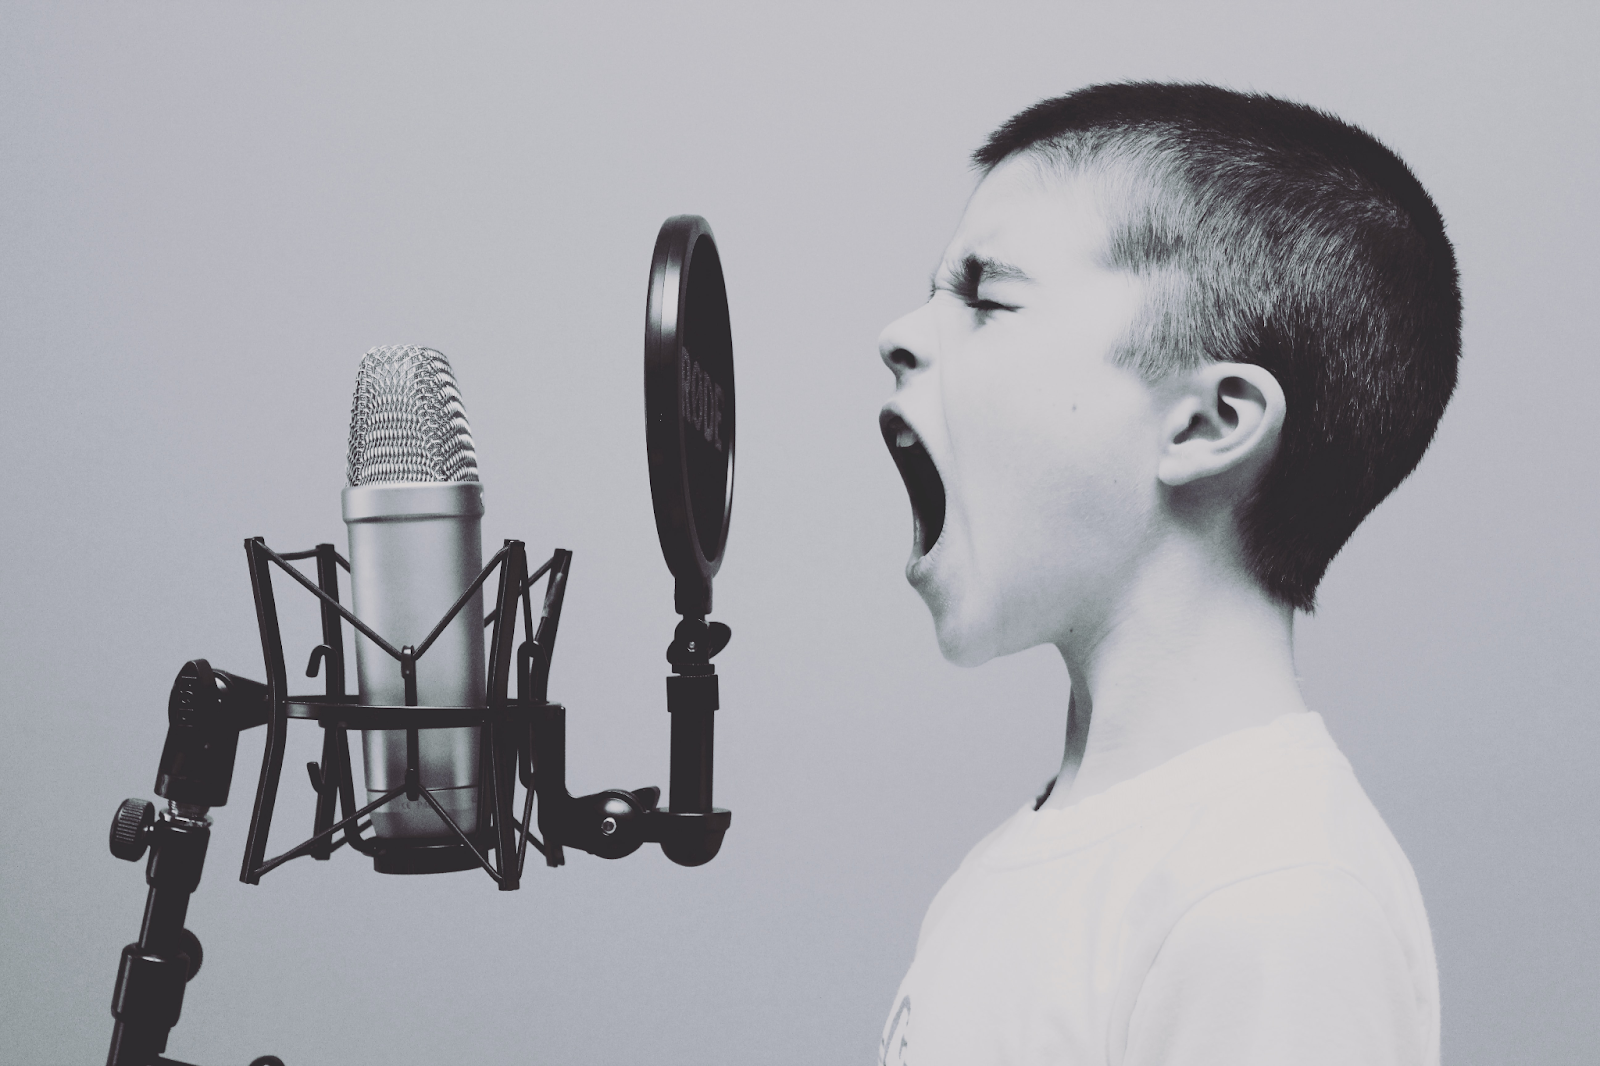 A child singing into a microphone.